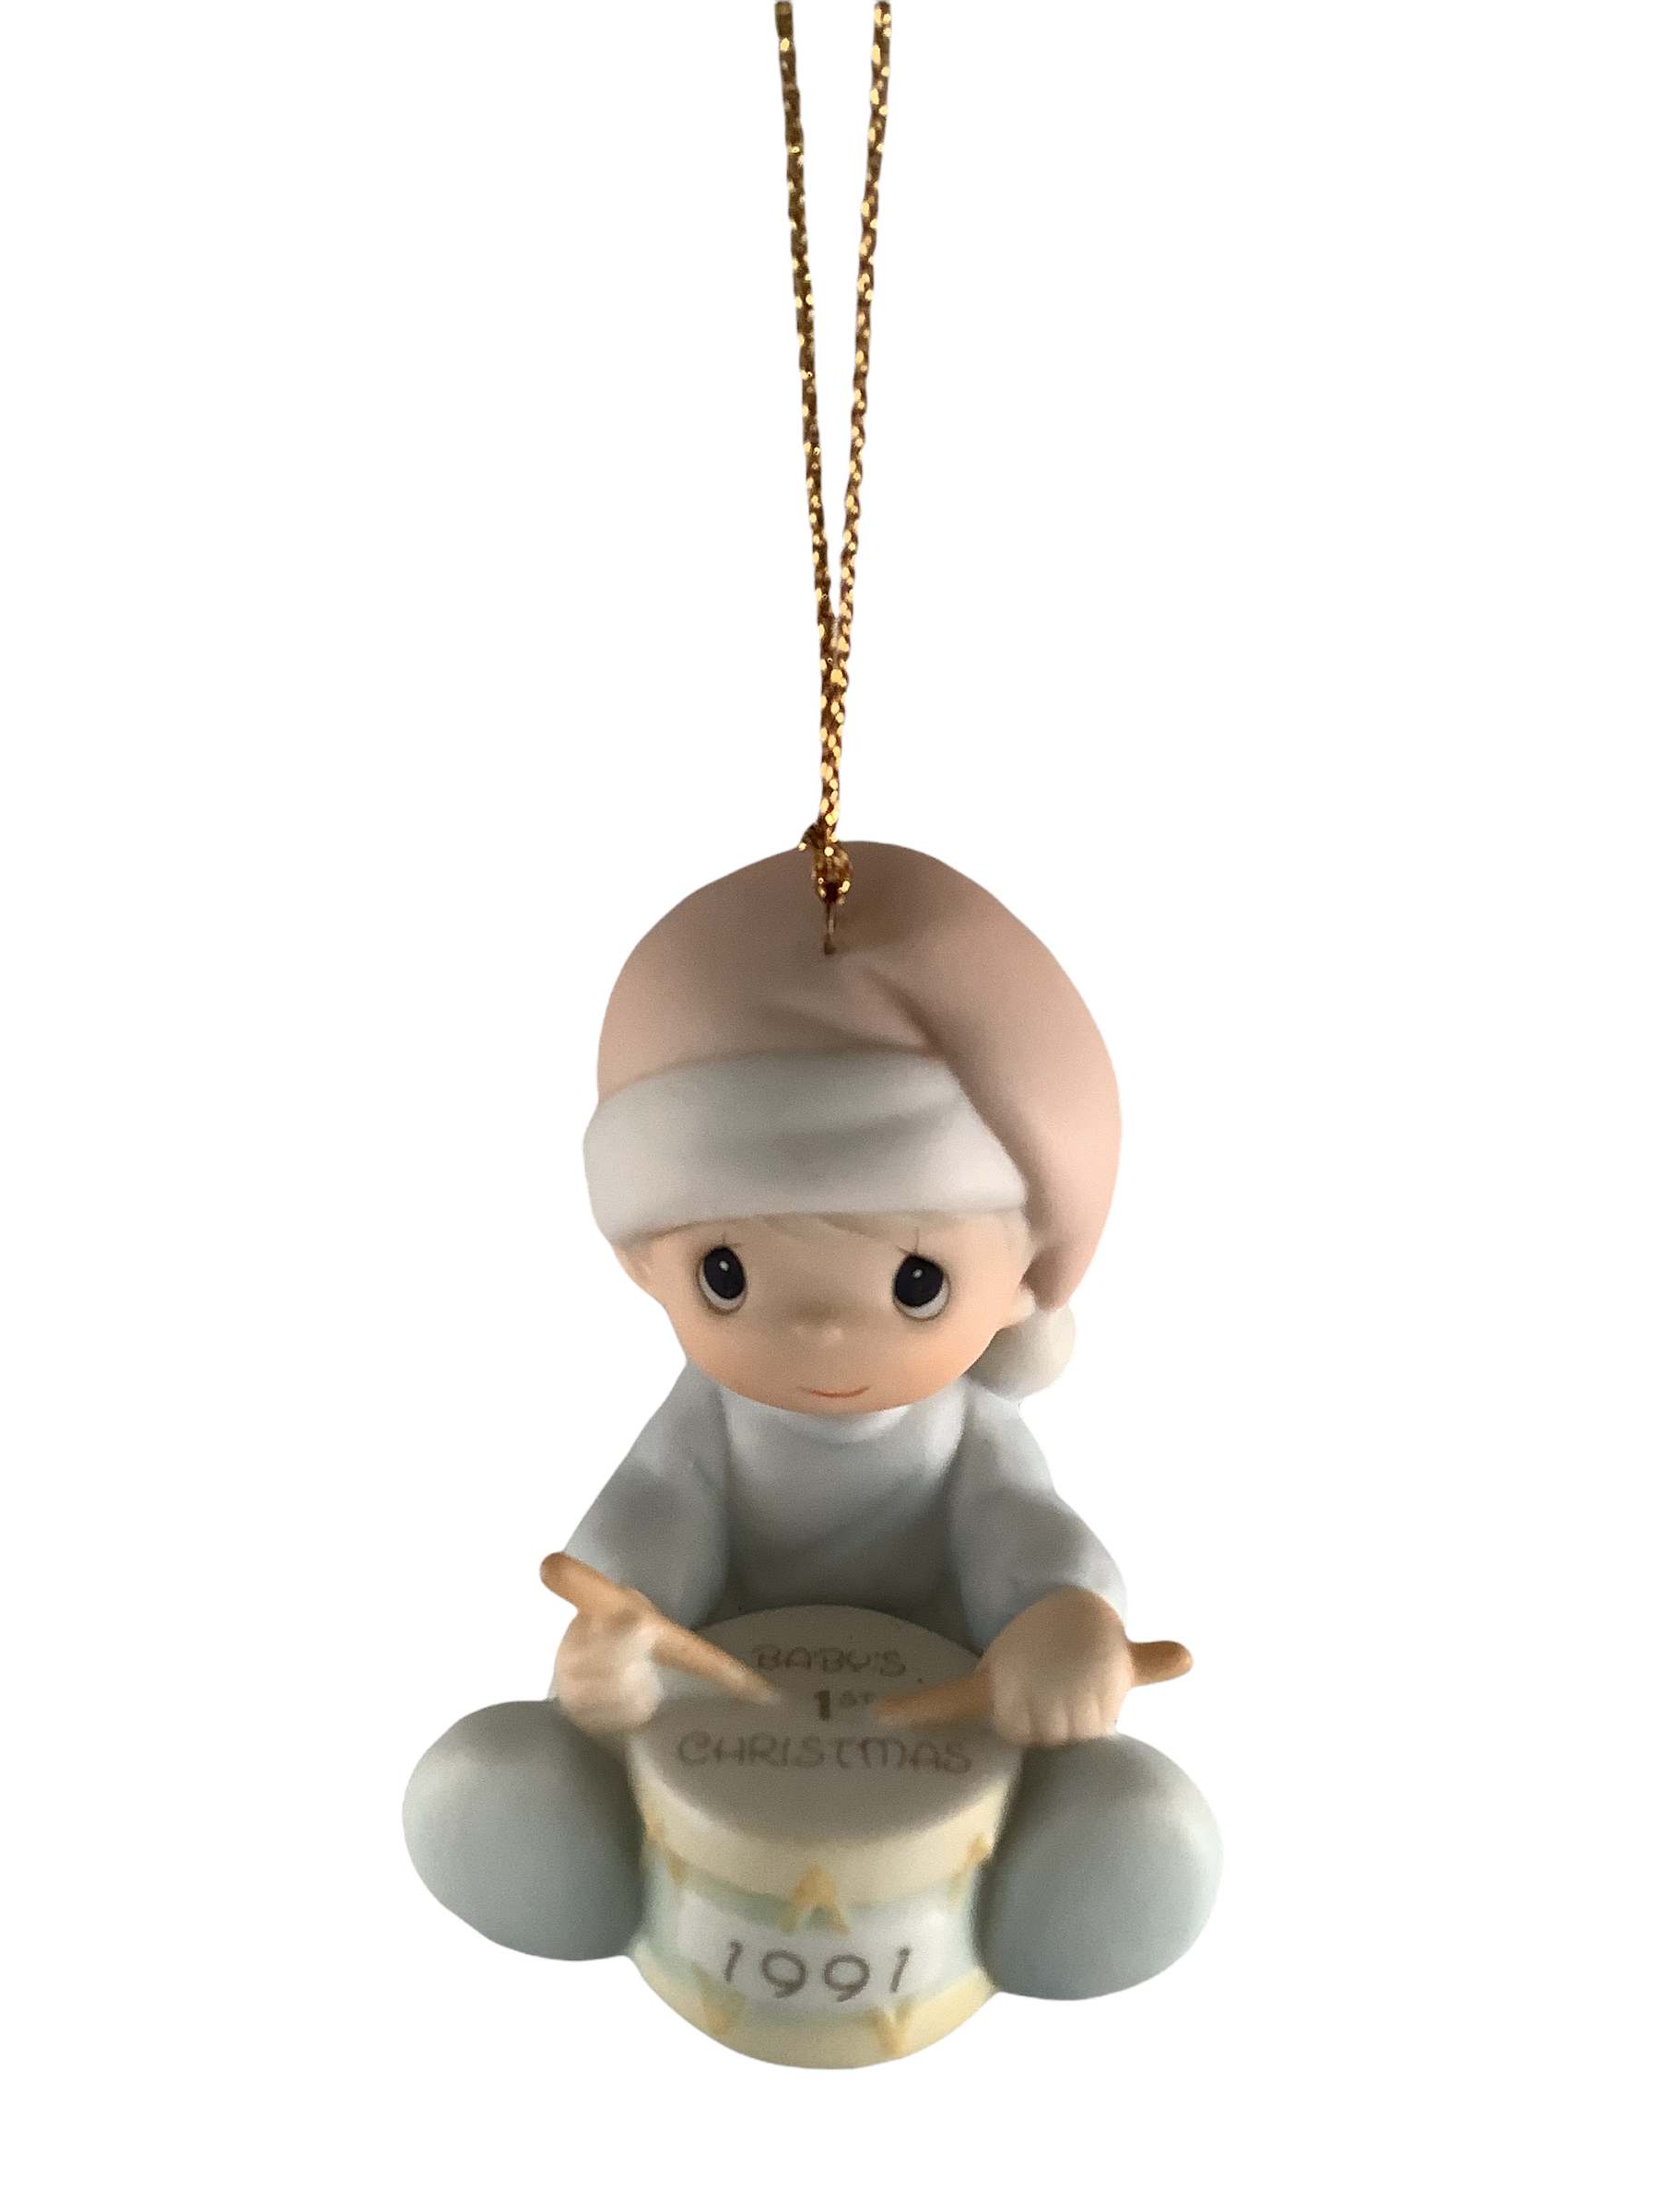 Baby's First Christmas 1991 (Boy) - Precious Moment Ornament